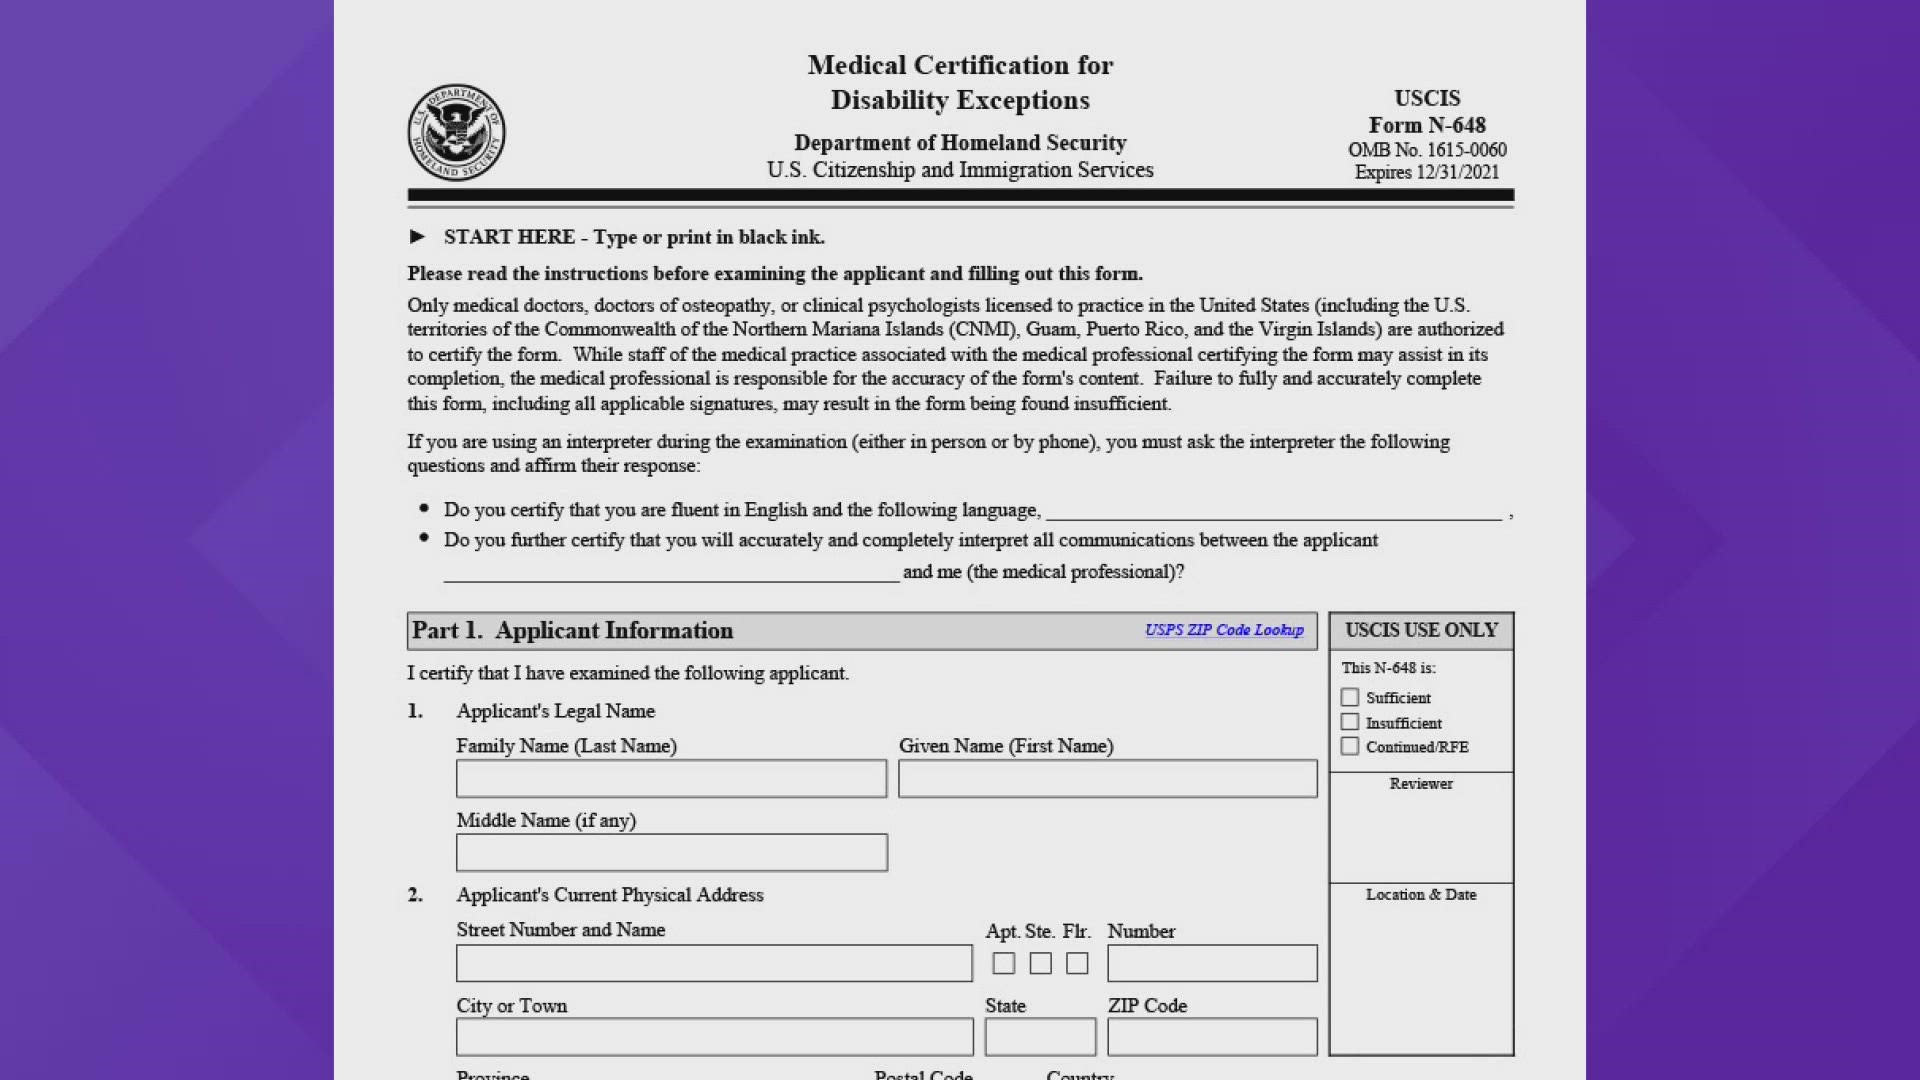 The current N-648 form listed on the US Citizenship and Immigration Services website is outdated.